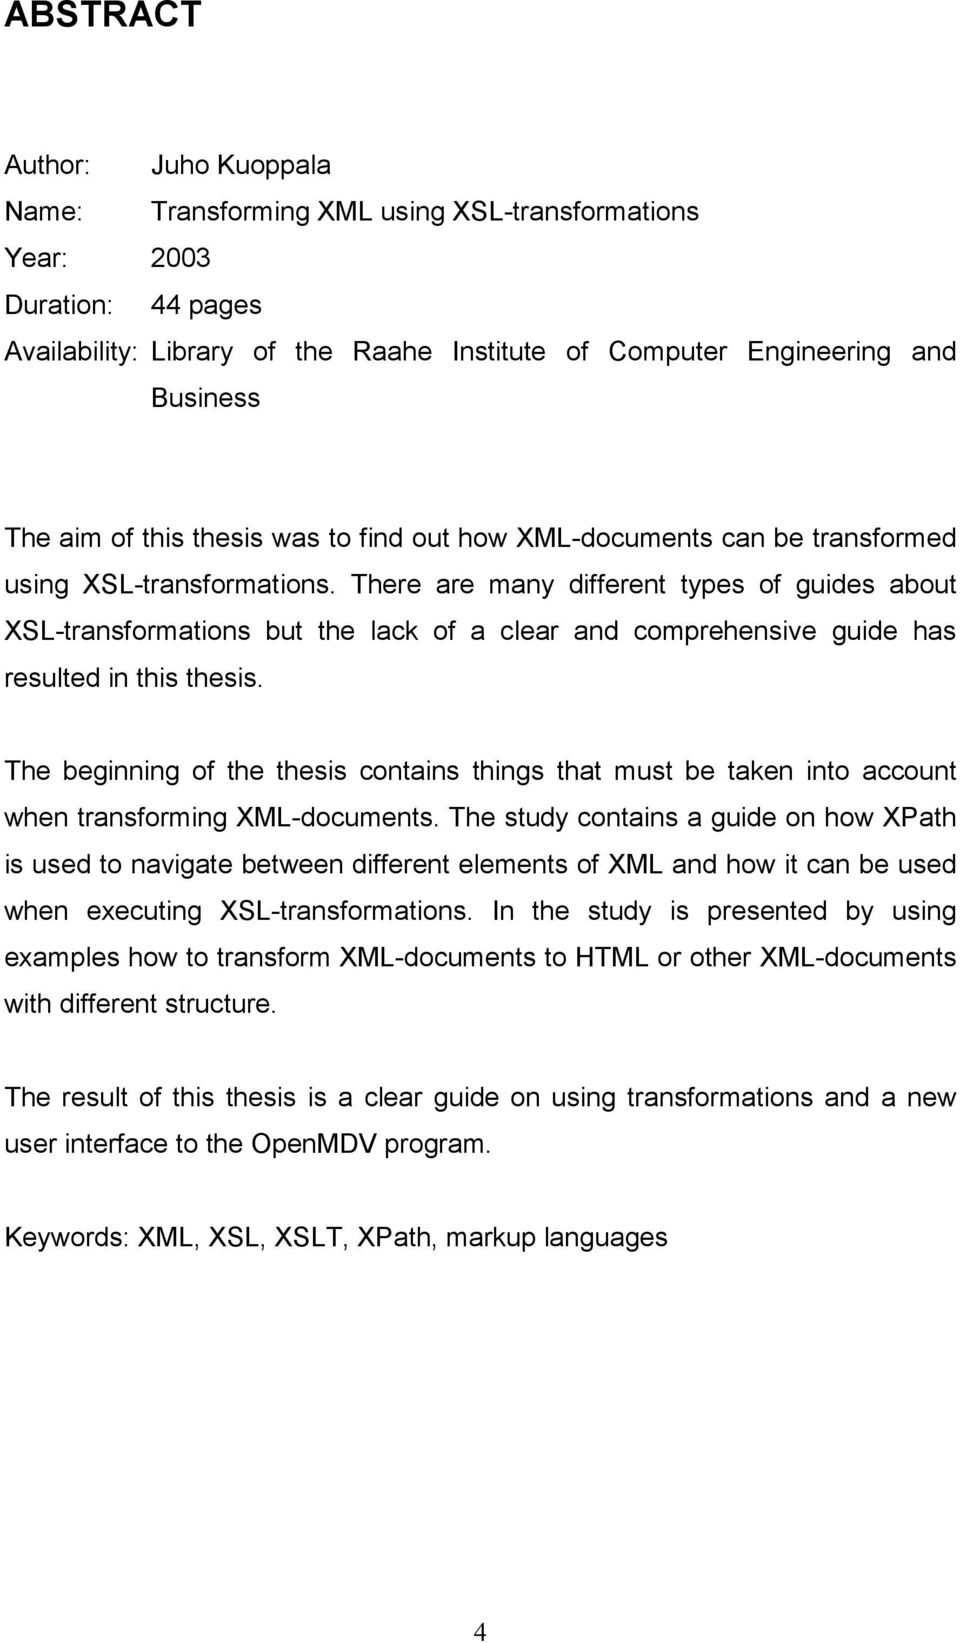 There are many different types of guides about XSL-transformations but the lack of a clear and comprehensive guide has resulted in this thesis.